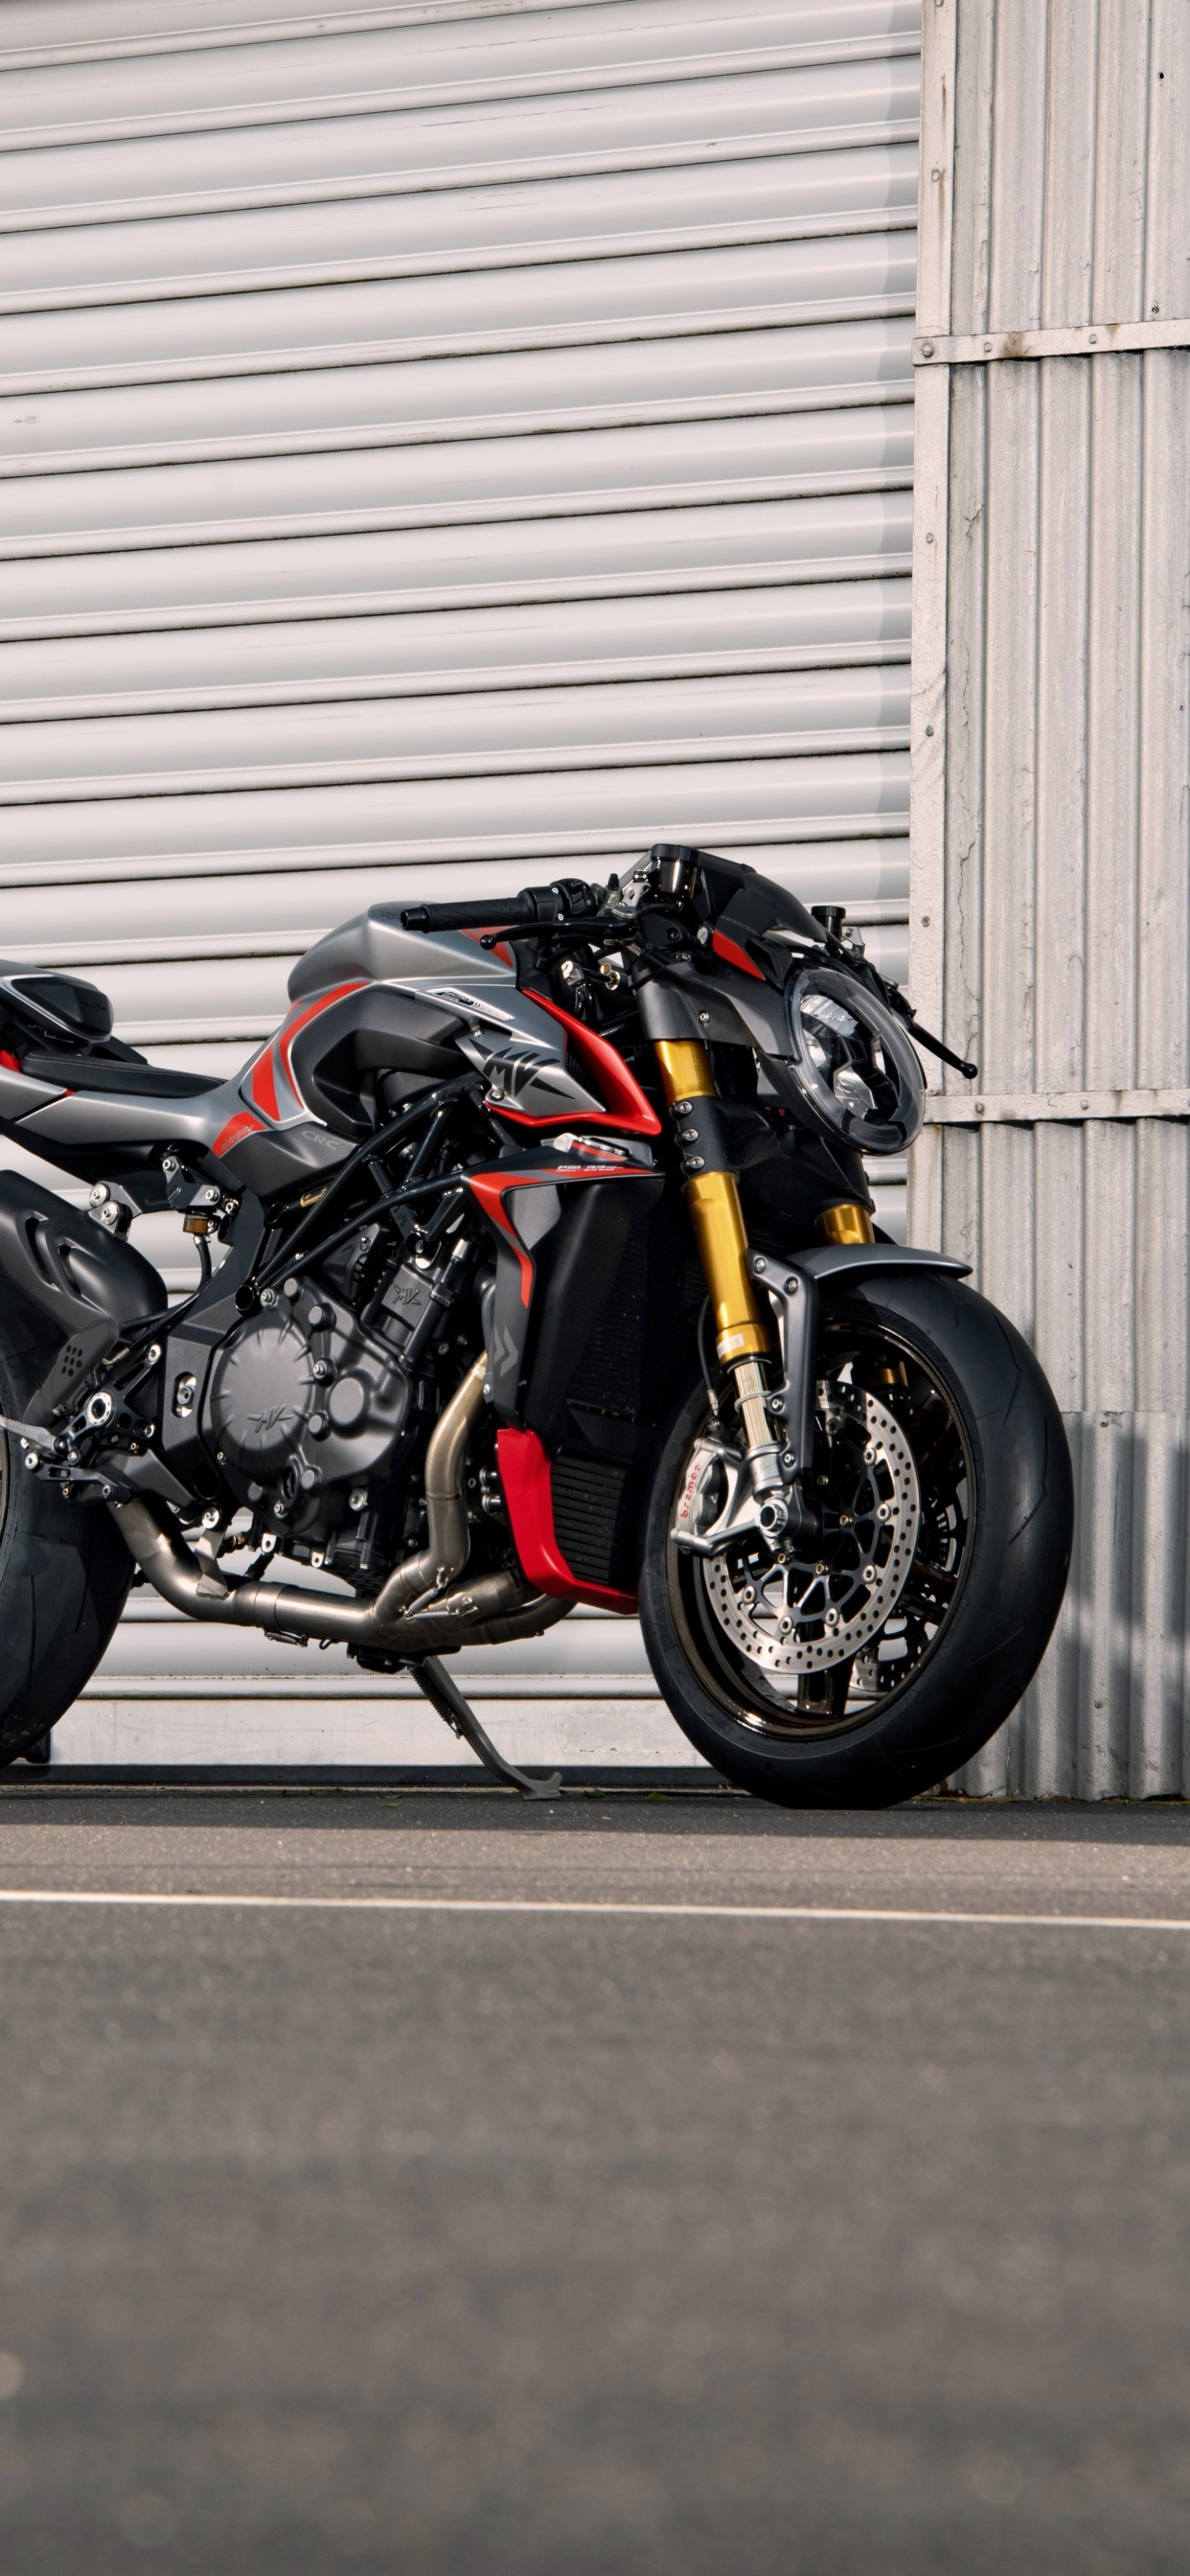 MV Agusta Brutale 1000, Nurburgring wallpaper, Limited edition, Bikes collection, 1250x2690 HD Handy